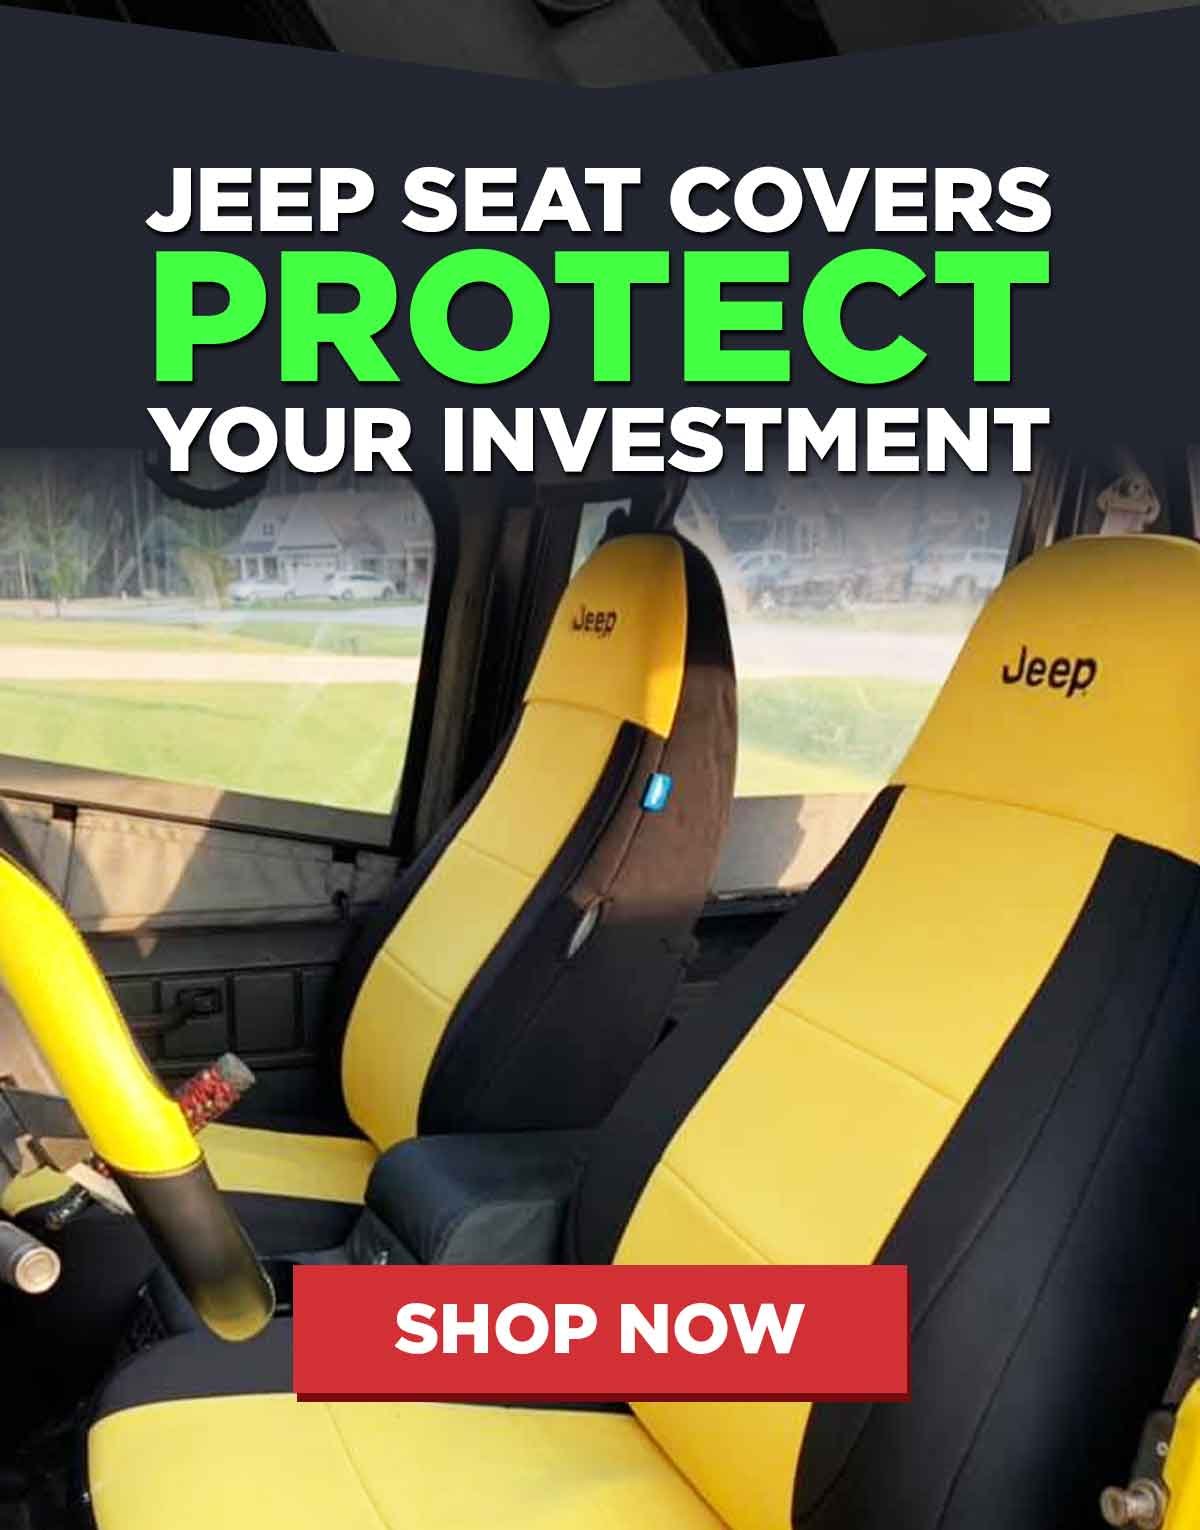 Jeep Seat Covers Protect Your Investment